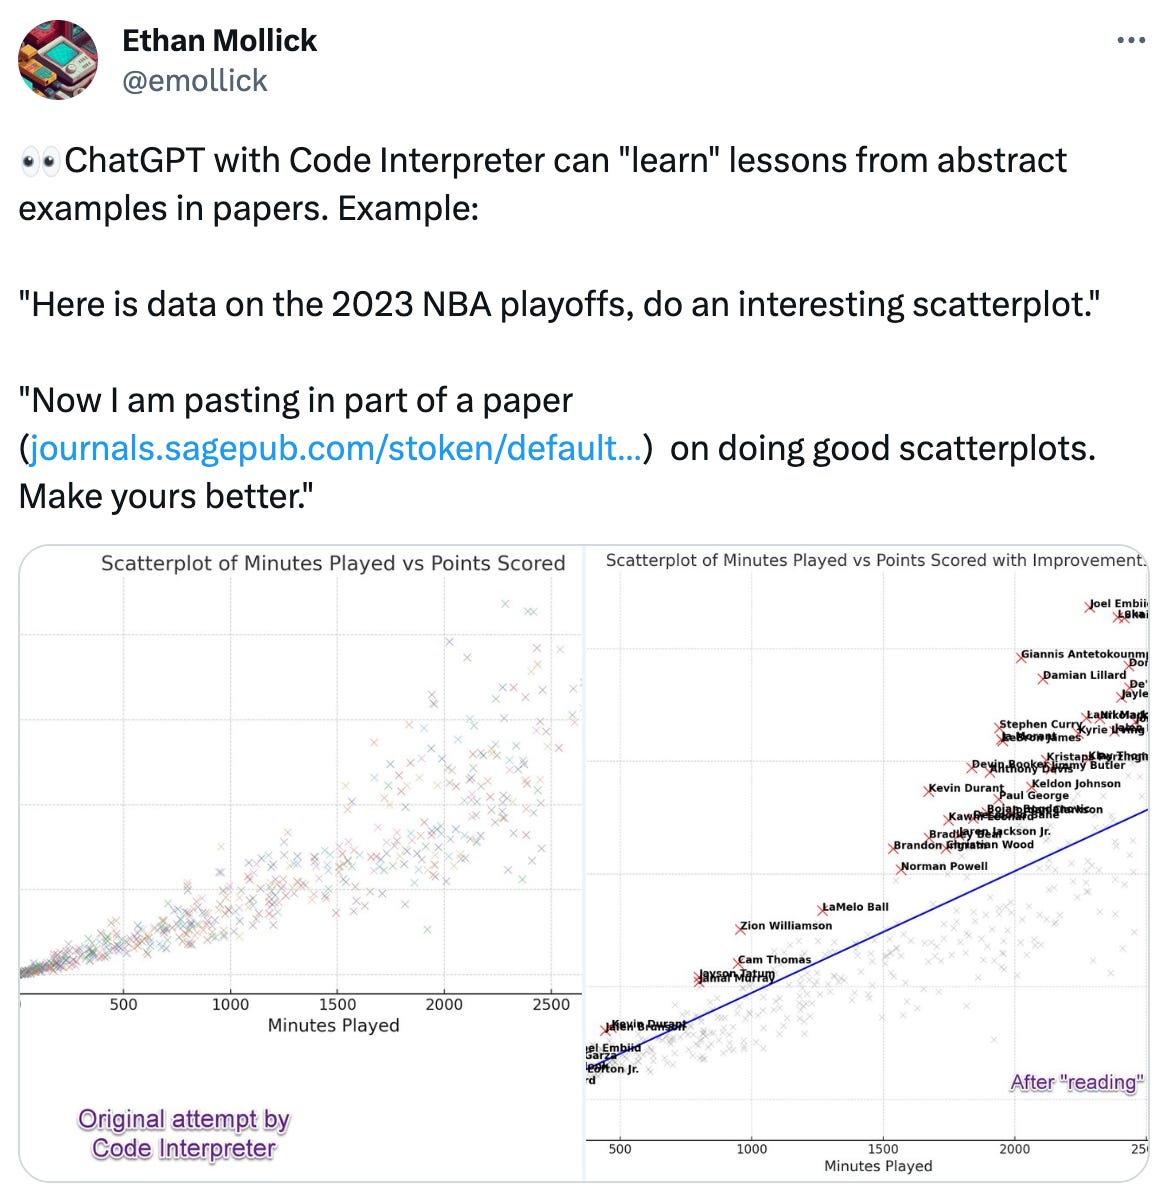  See new Tweets Conversation Ethan Mollick @emollick 👀ChatGPT with Code Interpreter can "learn" lessons from abstract examples in papers. Example:  "Here is data on the 2023 NBA playoffs, do an interesting scatterplot."  "Now I am pasting in part of a paper (https://journals.sagepub.com/stoken/default+domain/10.1177%2F15291006211051956-FREE/full#abstract)  on doing good scatterplots. Make yours better."